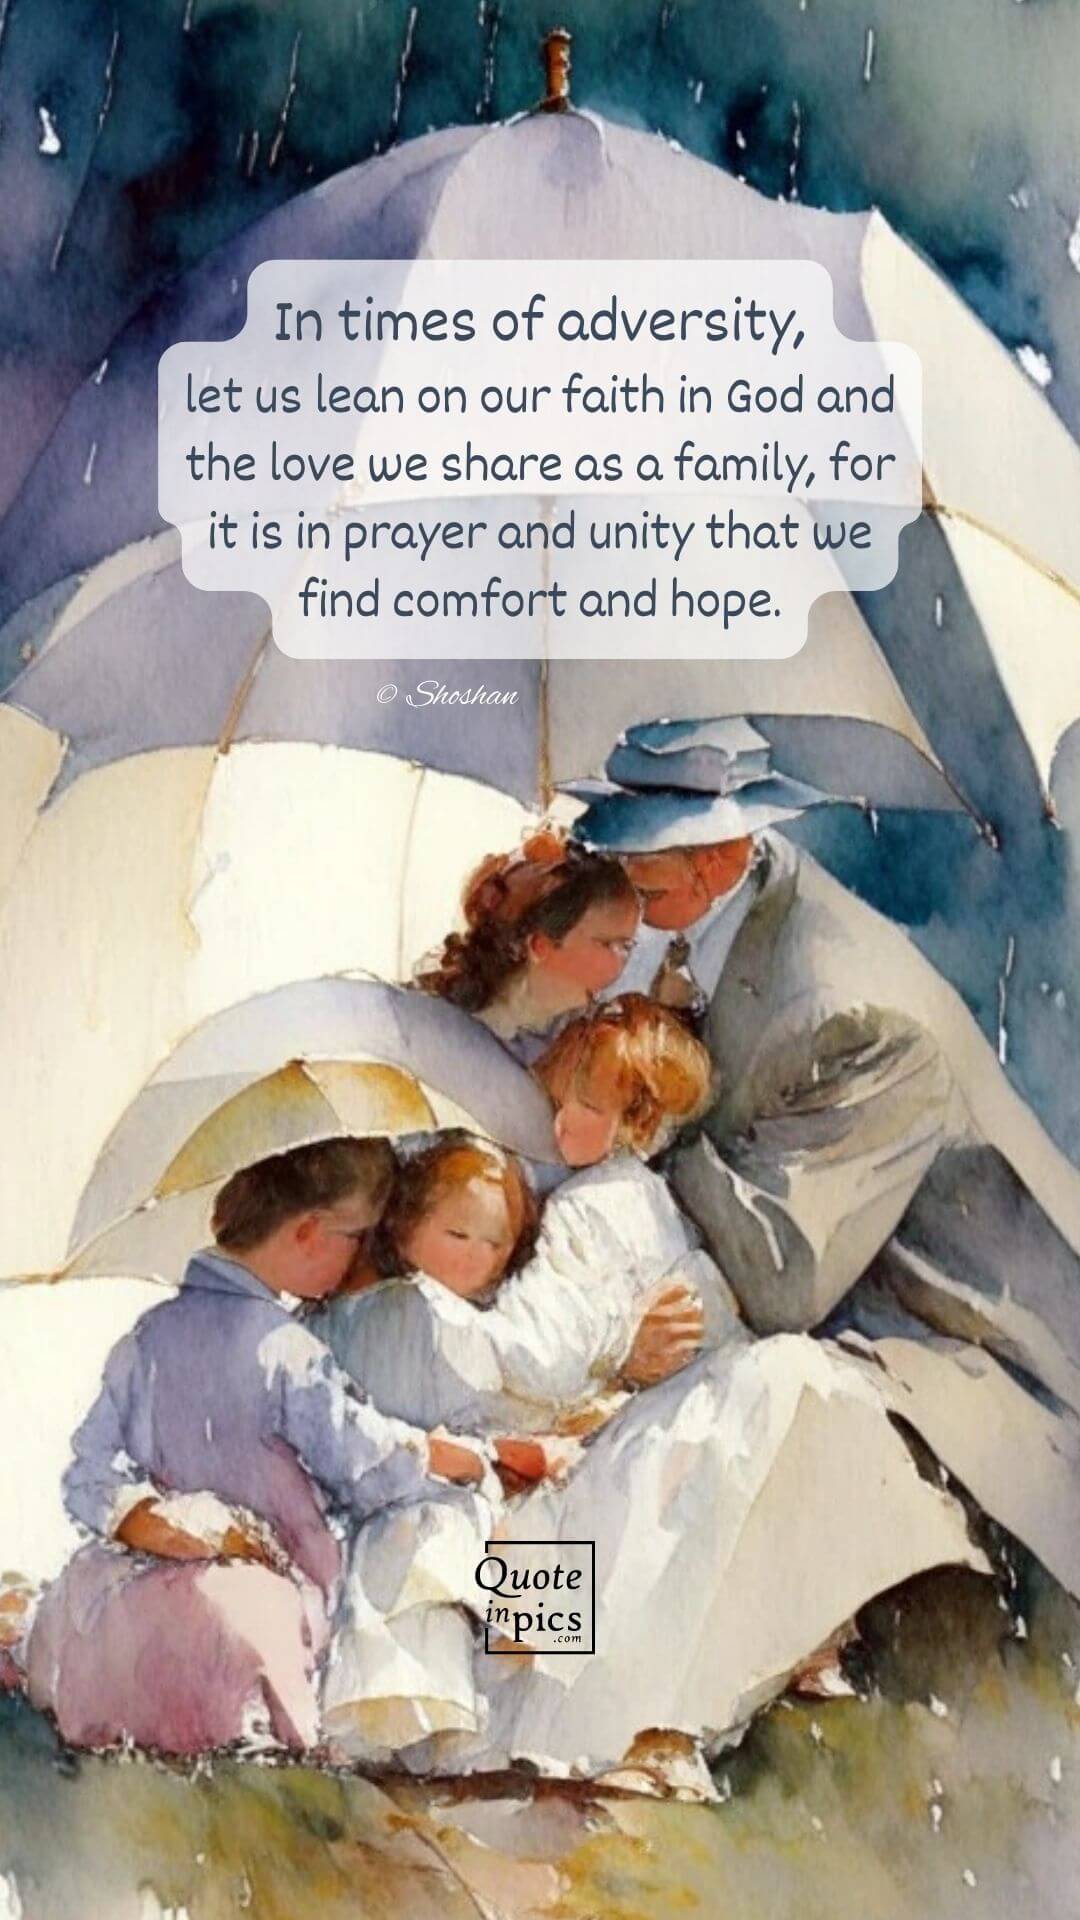 In times of adversity, let us lean on our faith in God and the love we share as a family